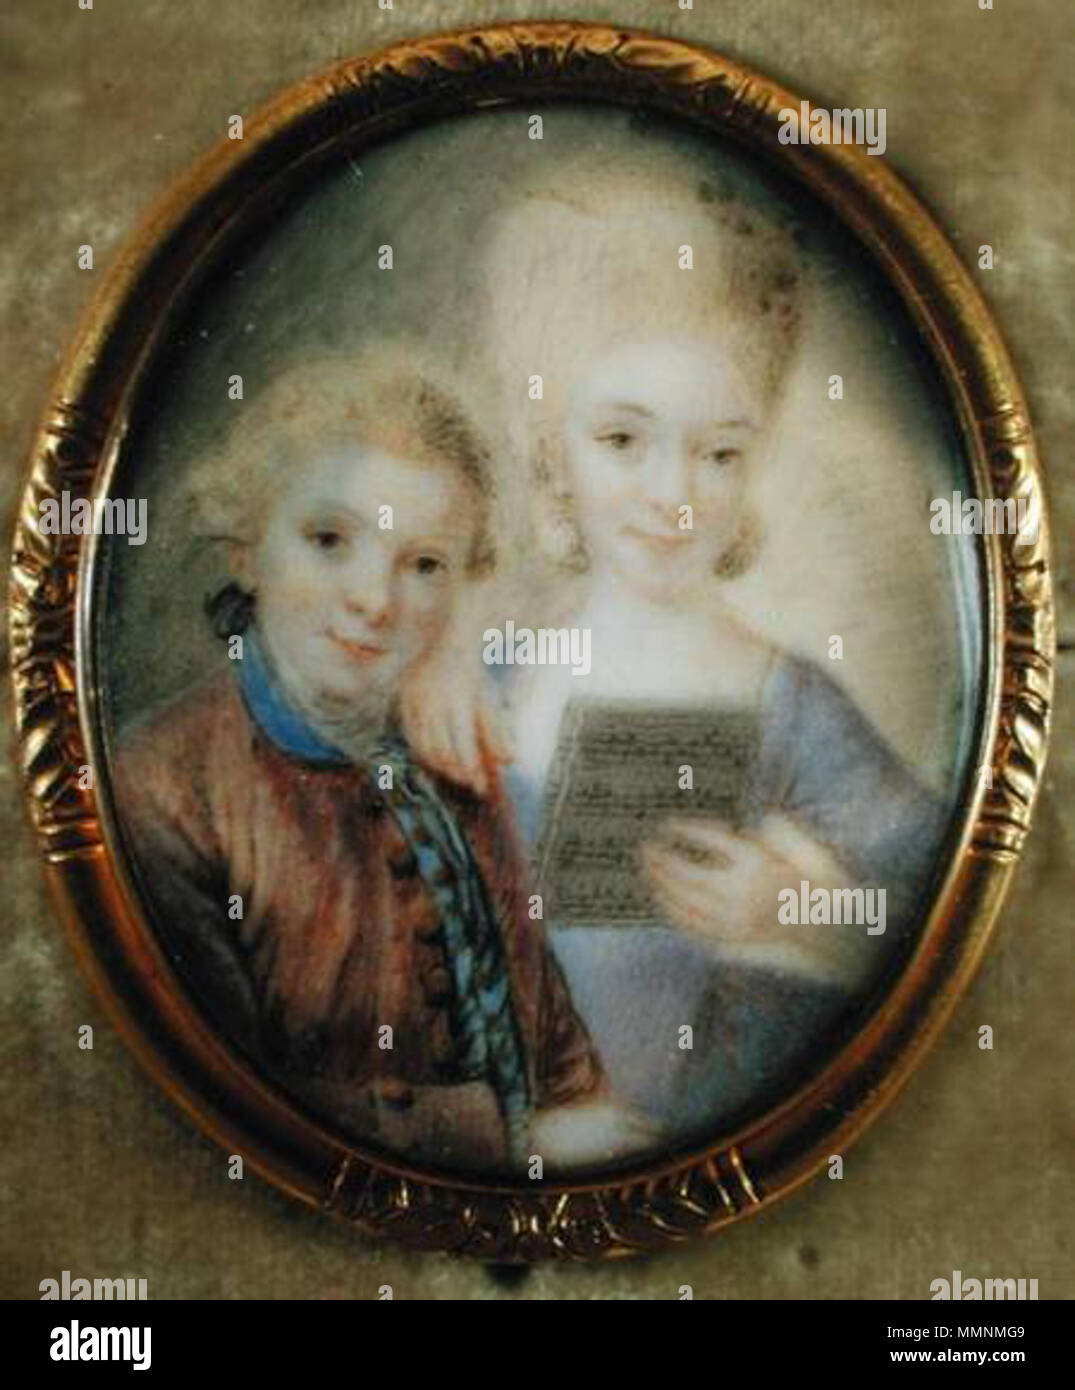 . Wolfgang Amadeus Mozart (1756–1791) and his older sister Maria Anna Mozart (Nannerl) (1751–1829)  Wolfgang and his sister Maria Anna. circa 1765. Wolfgang amadeus mozart 1756 j hi Stock Photo